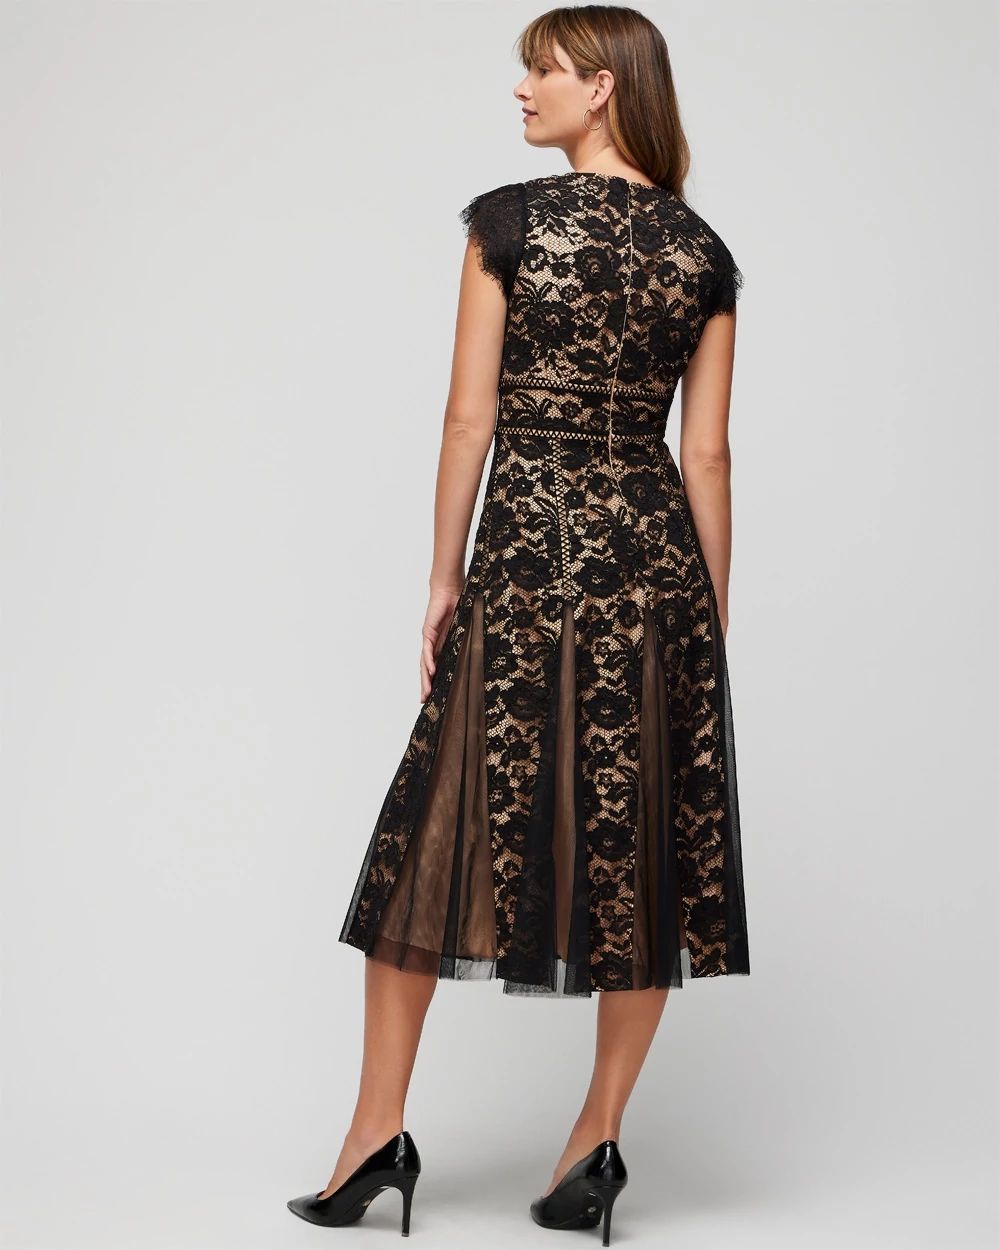 Petite Cap Sleeve All Over Lace Godet Fit & Flare Dress